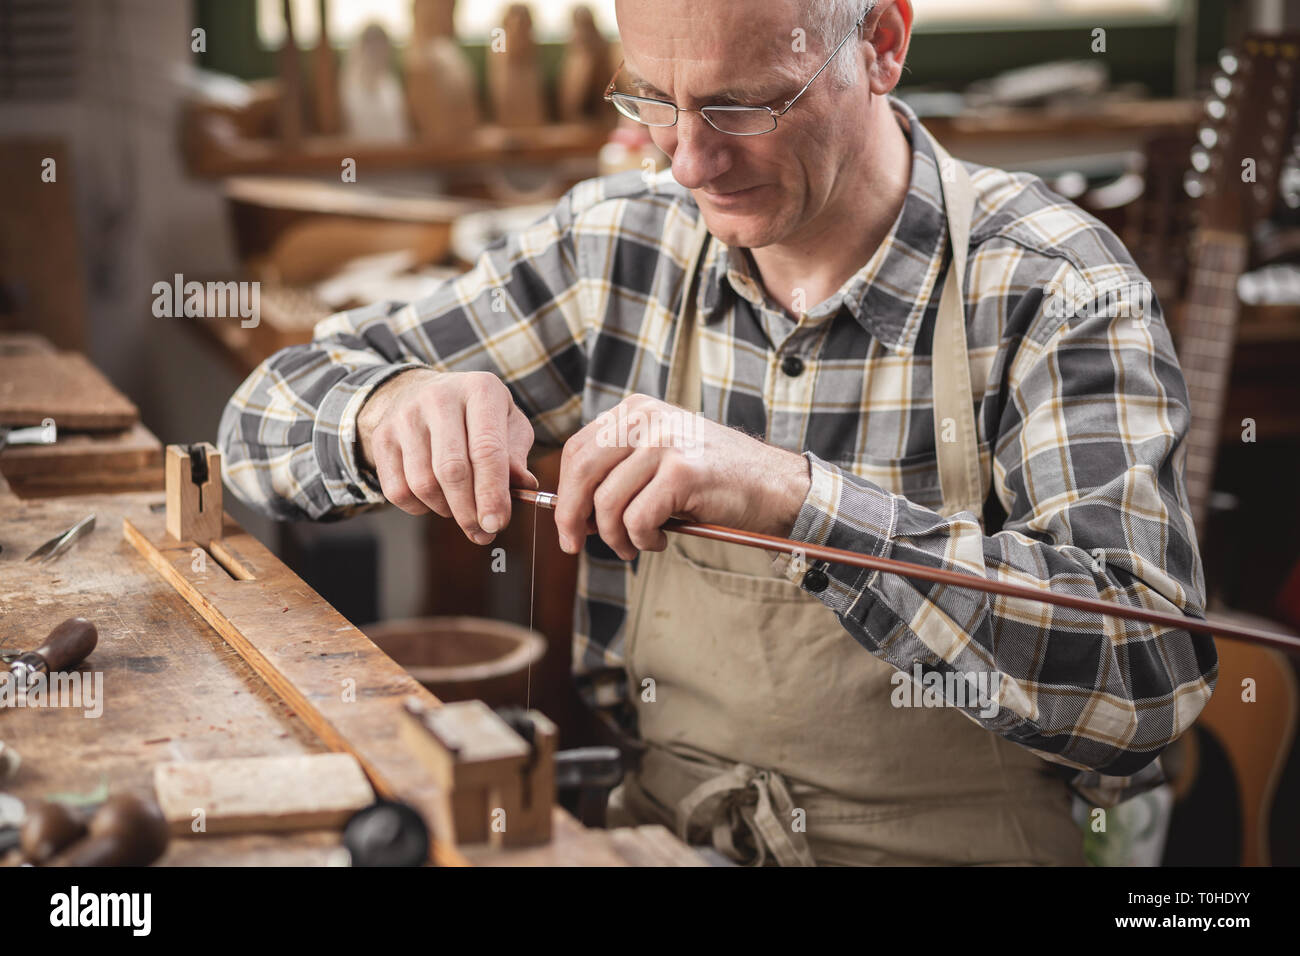 Mature instrument maker inside a rustic workshop is winding a wire around a violin bow Stock Photo